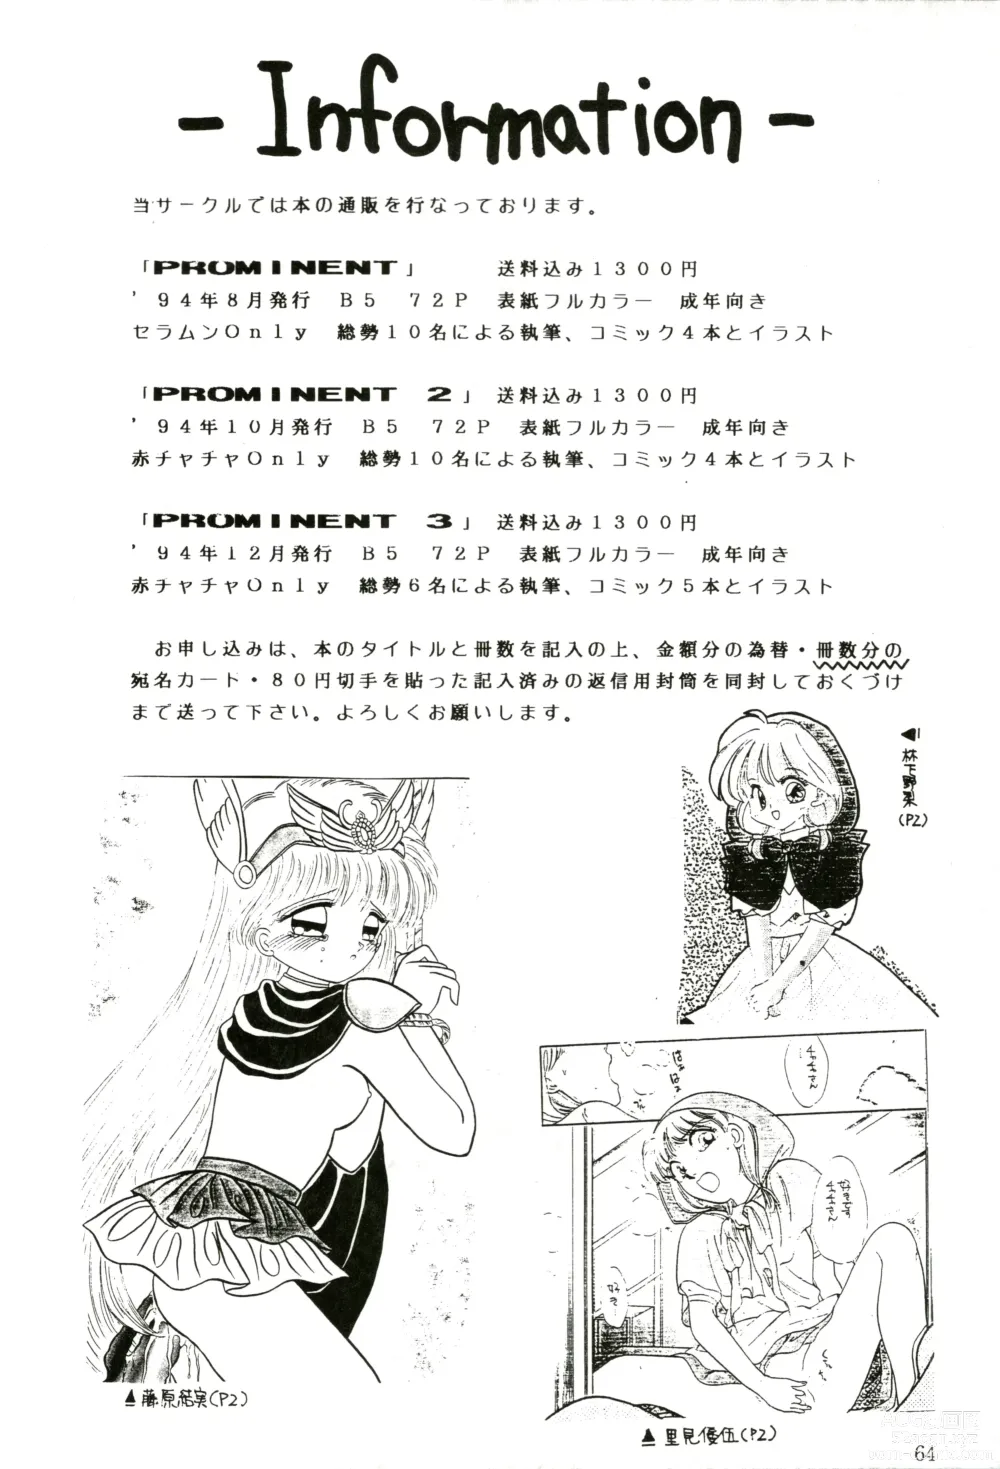 Page 66 of doujinshi PROMINENT 4